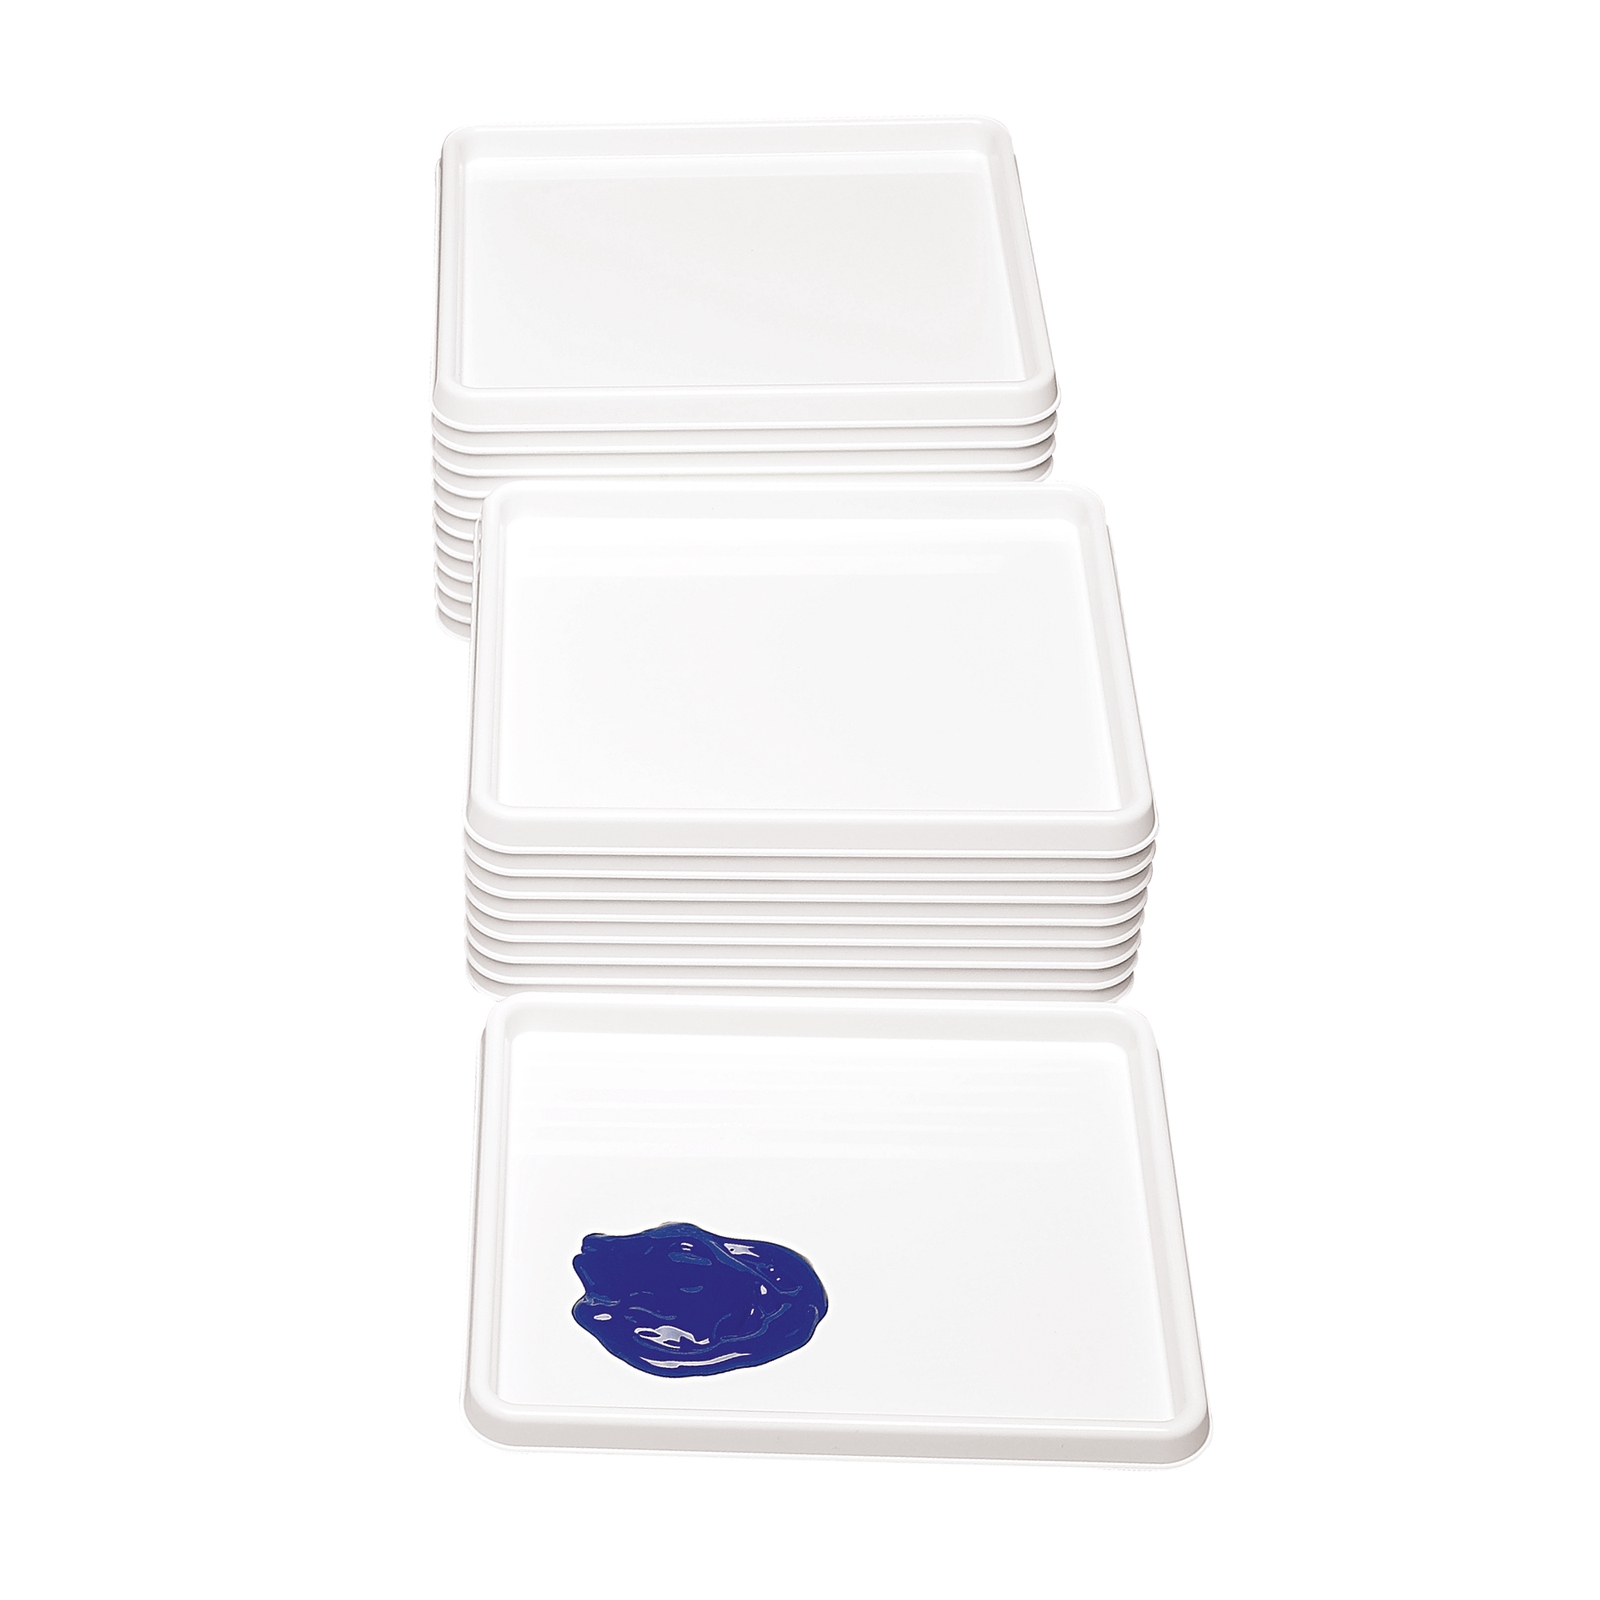 Colour Mixing Trays - 250 x 200mm - Pack of 20